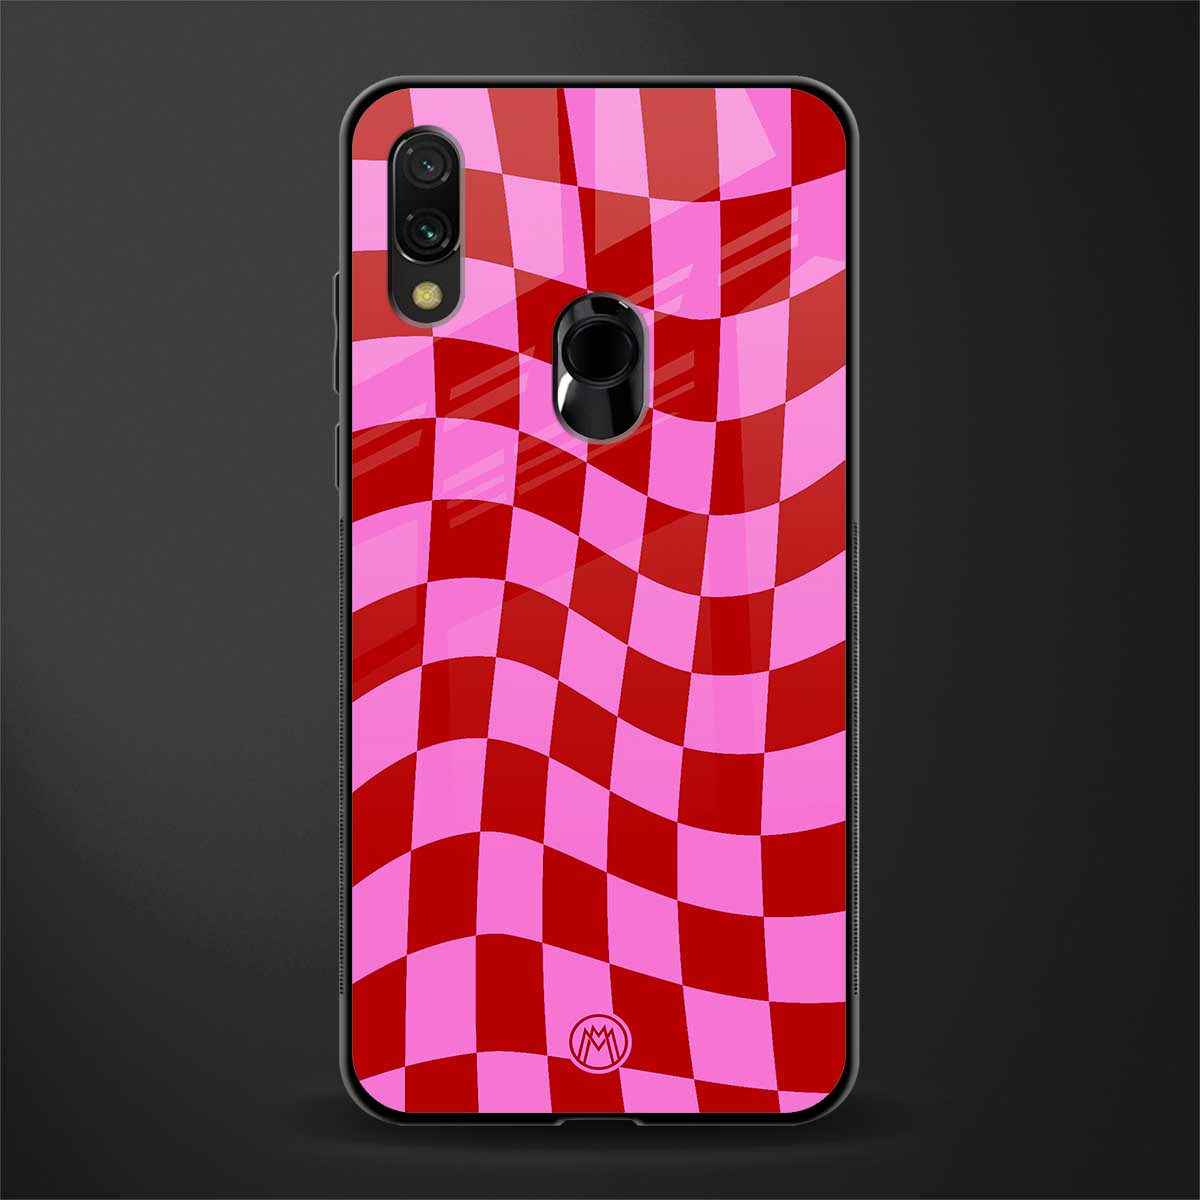 red pink trippy check pattern glass case for redmi note 7 pro image